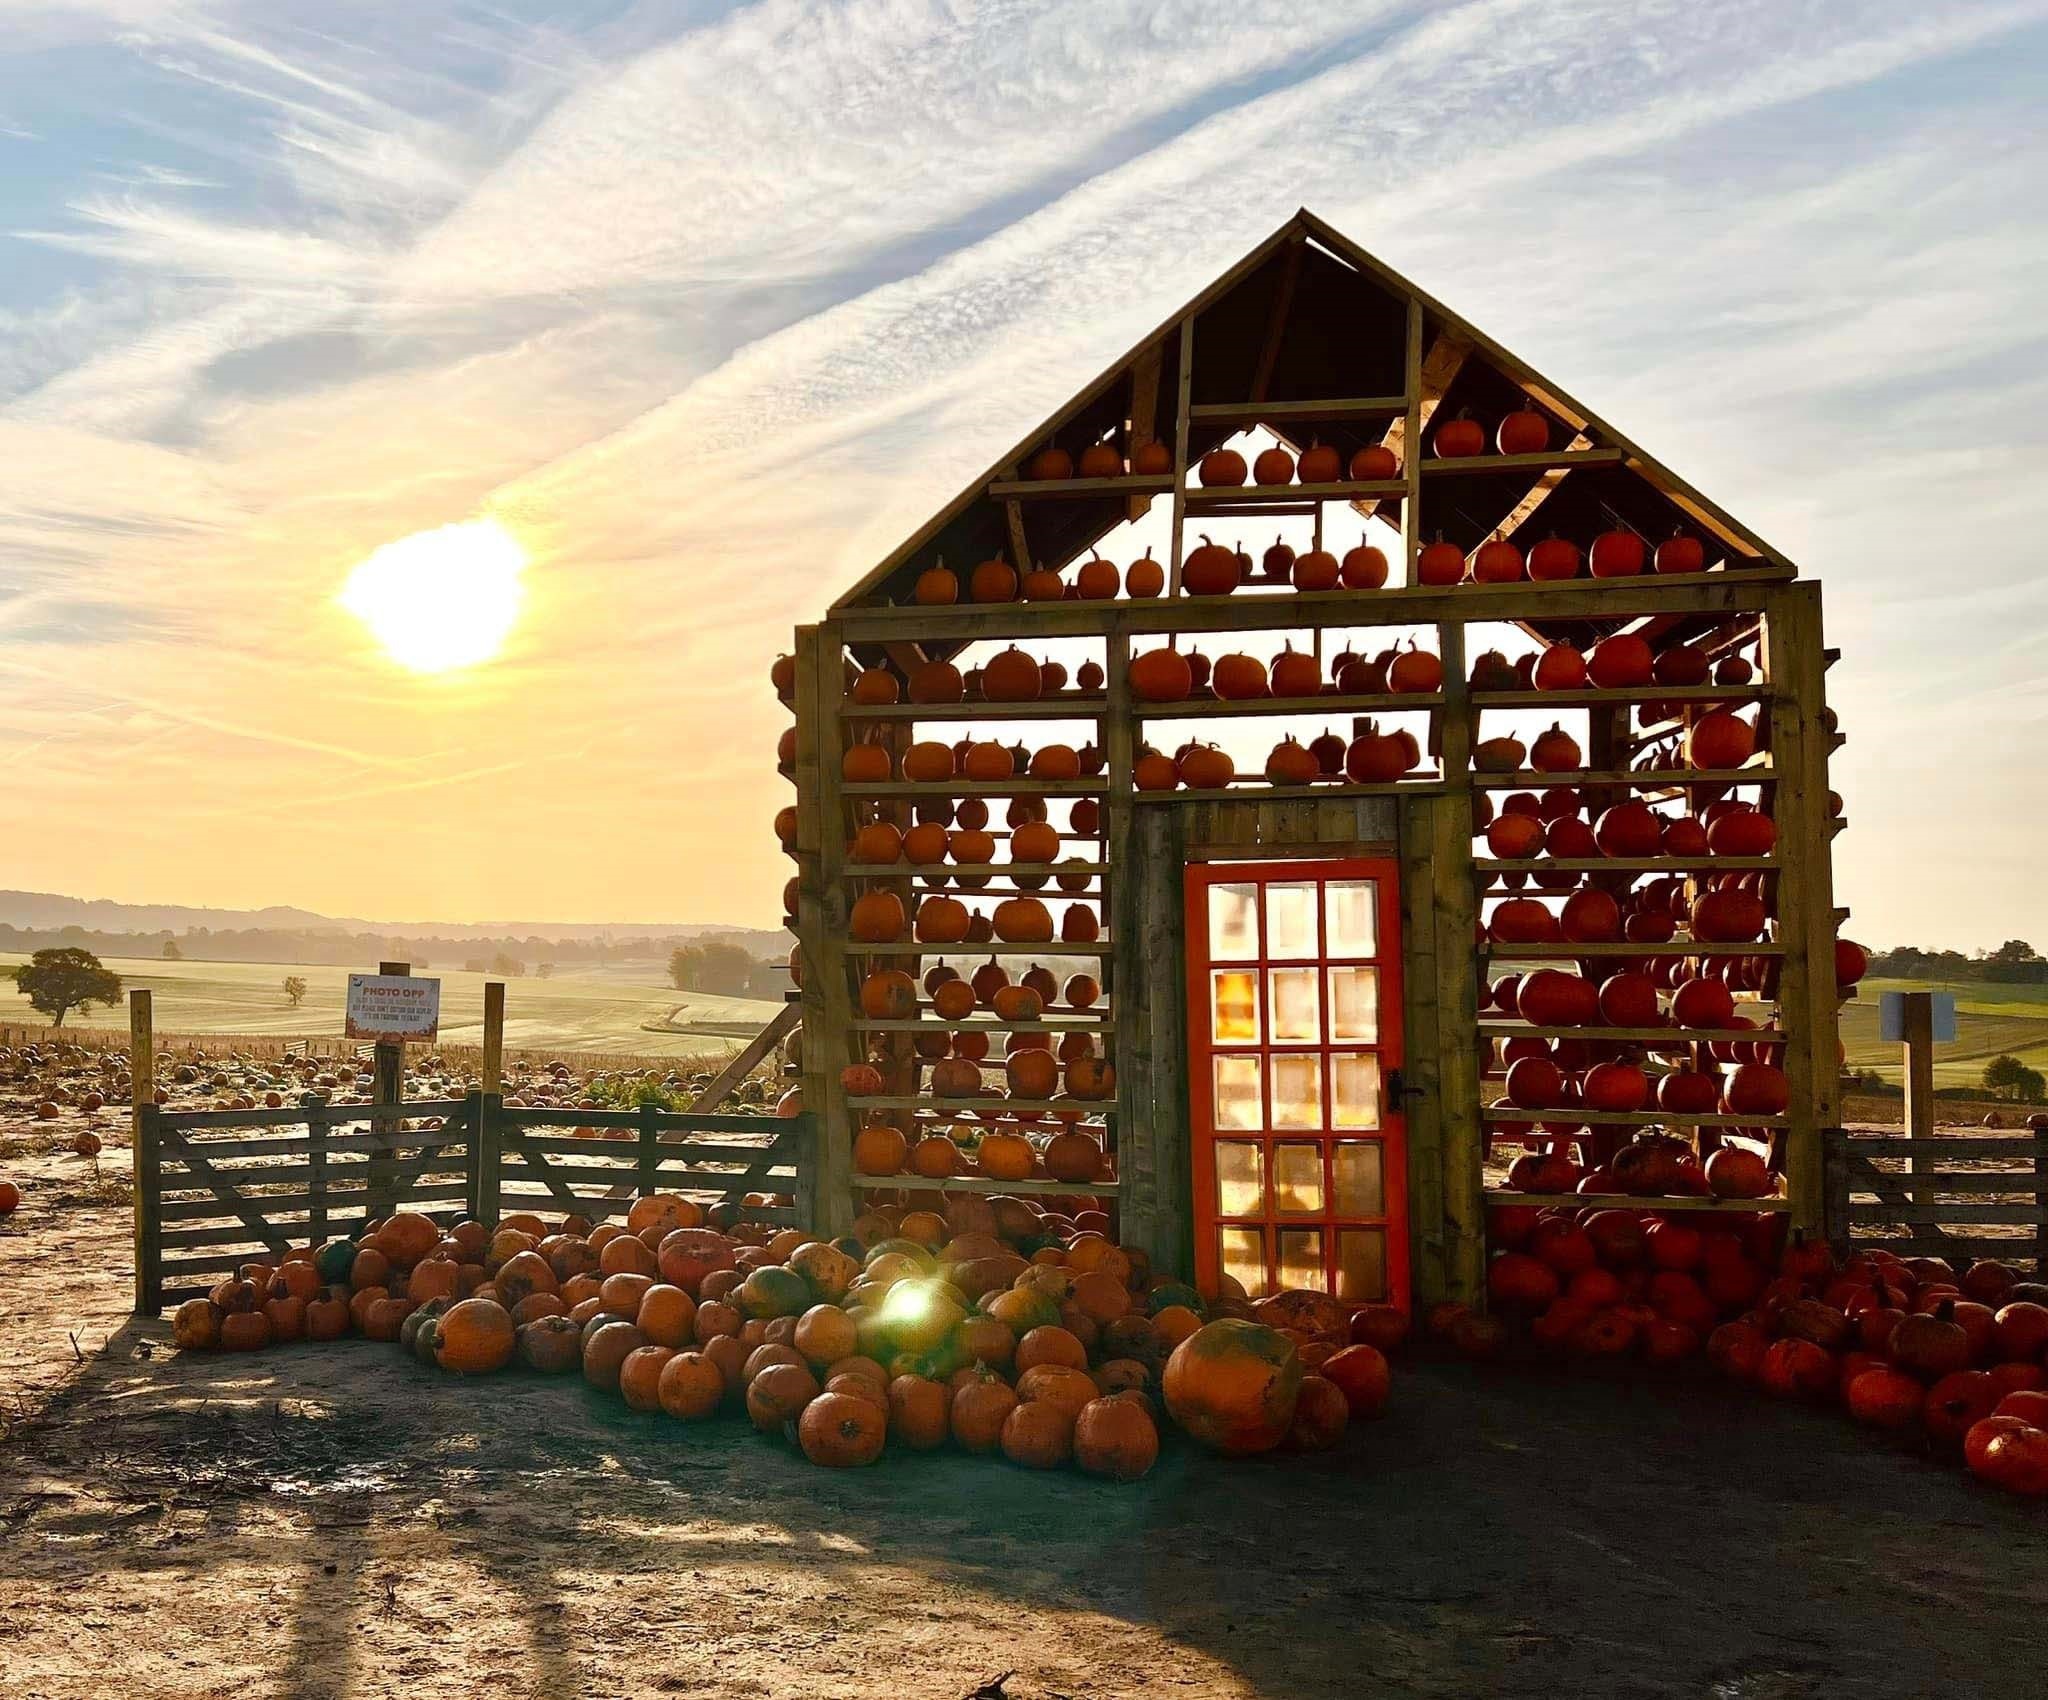 Pumpkin House at Farmer Copleys at Pontefract has been shortlisted for a national retail award